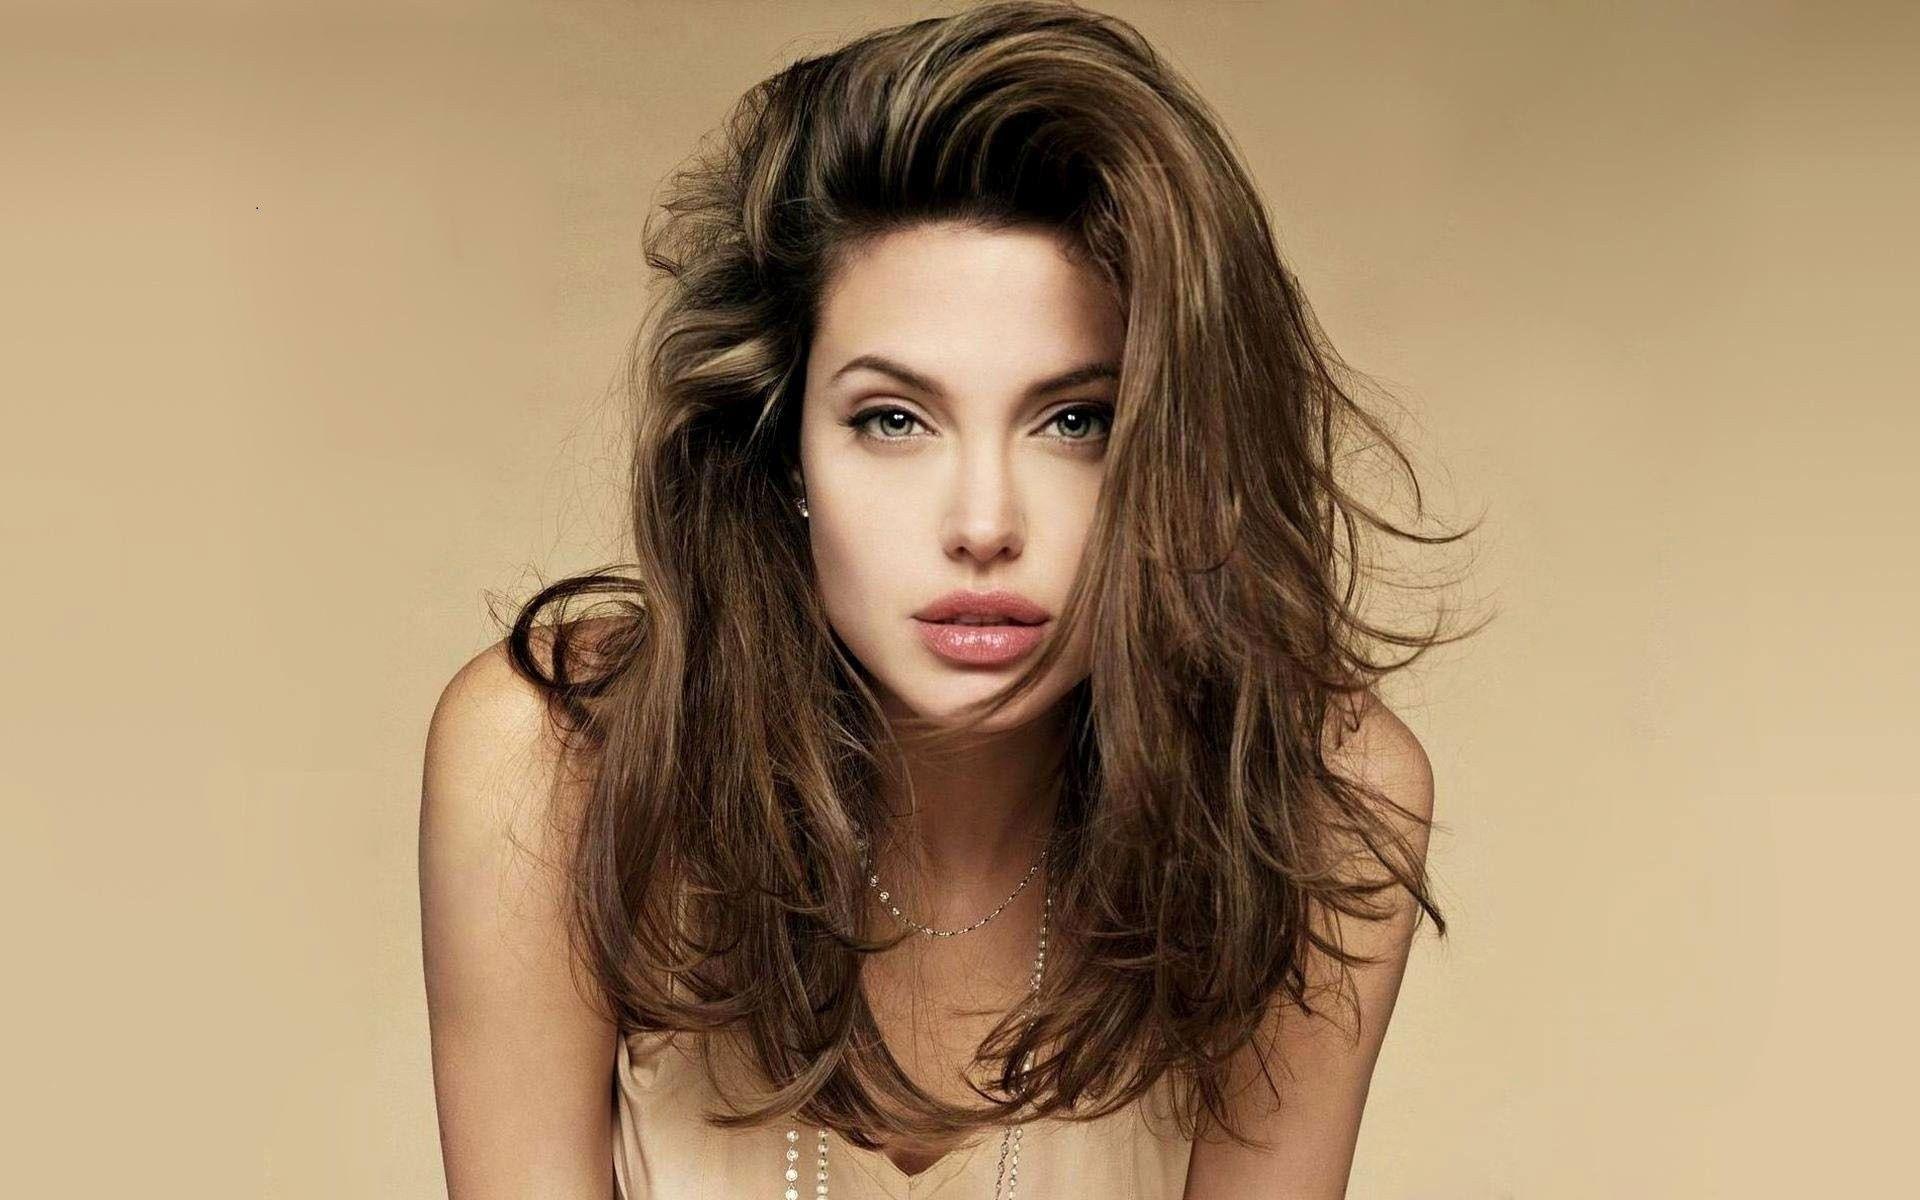 Top Angelina Jolie Wallpapers and Backgrounds Image Pohtos Download.